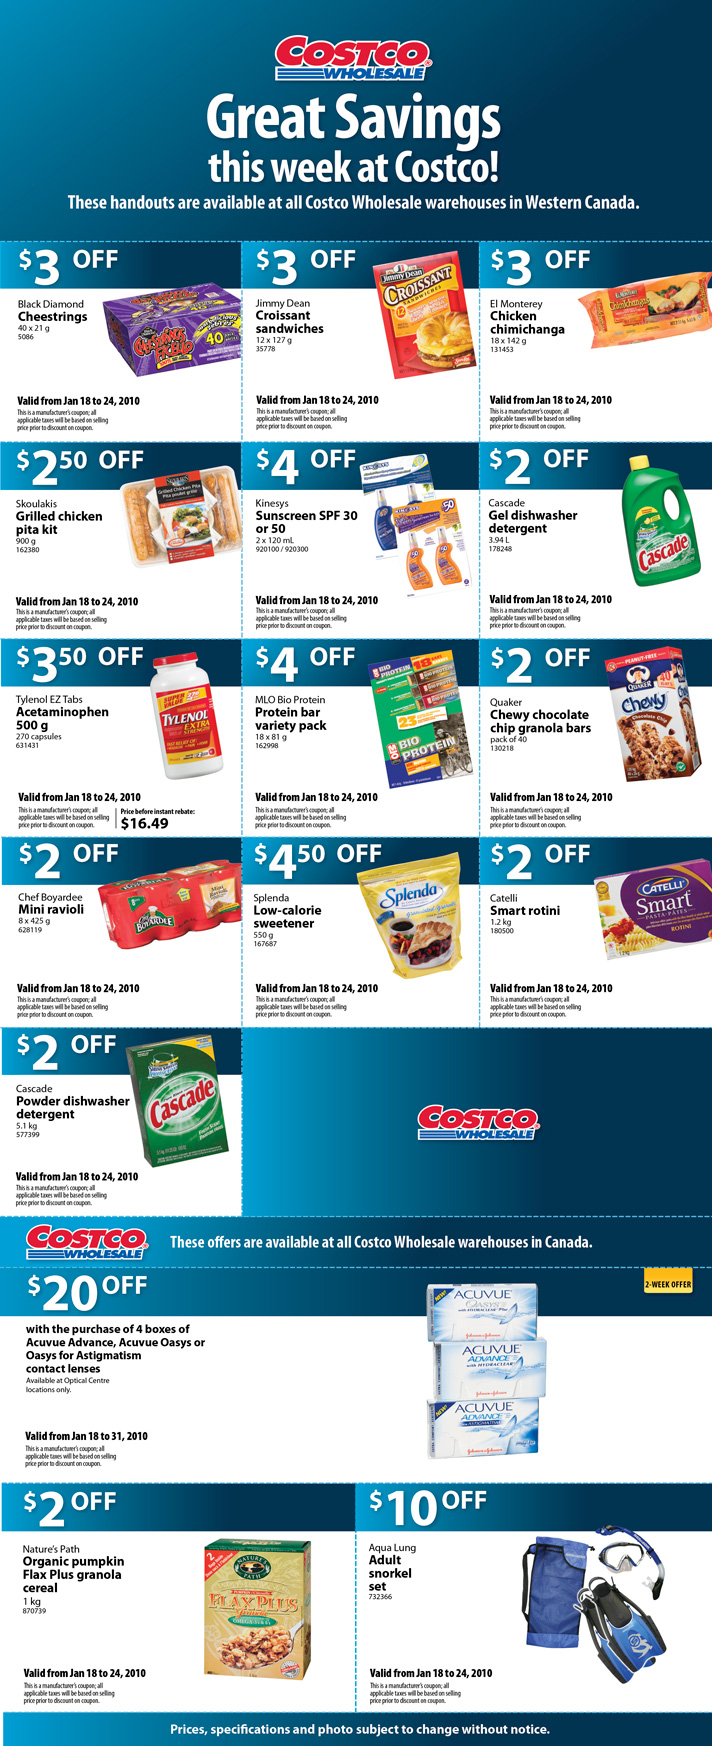 costco-instant-savings-coupons-valid-jan-18-24-2010-canadian